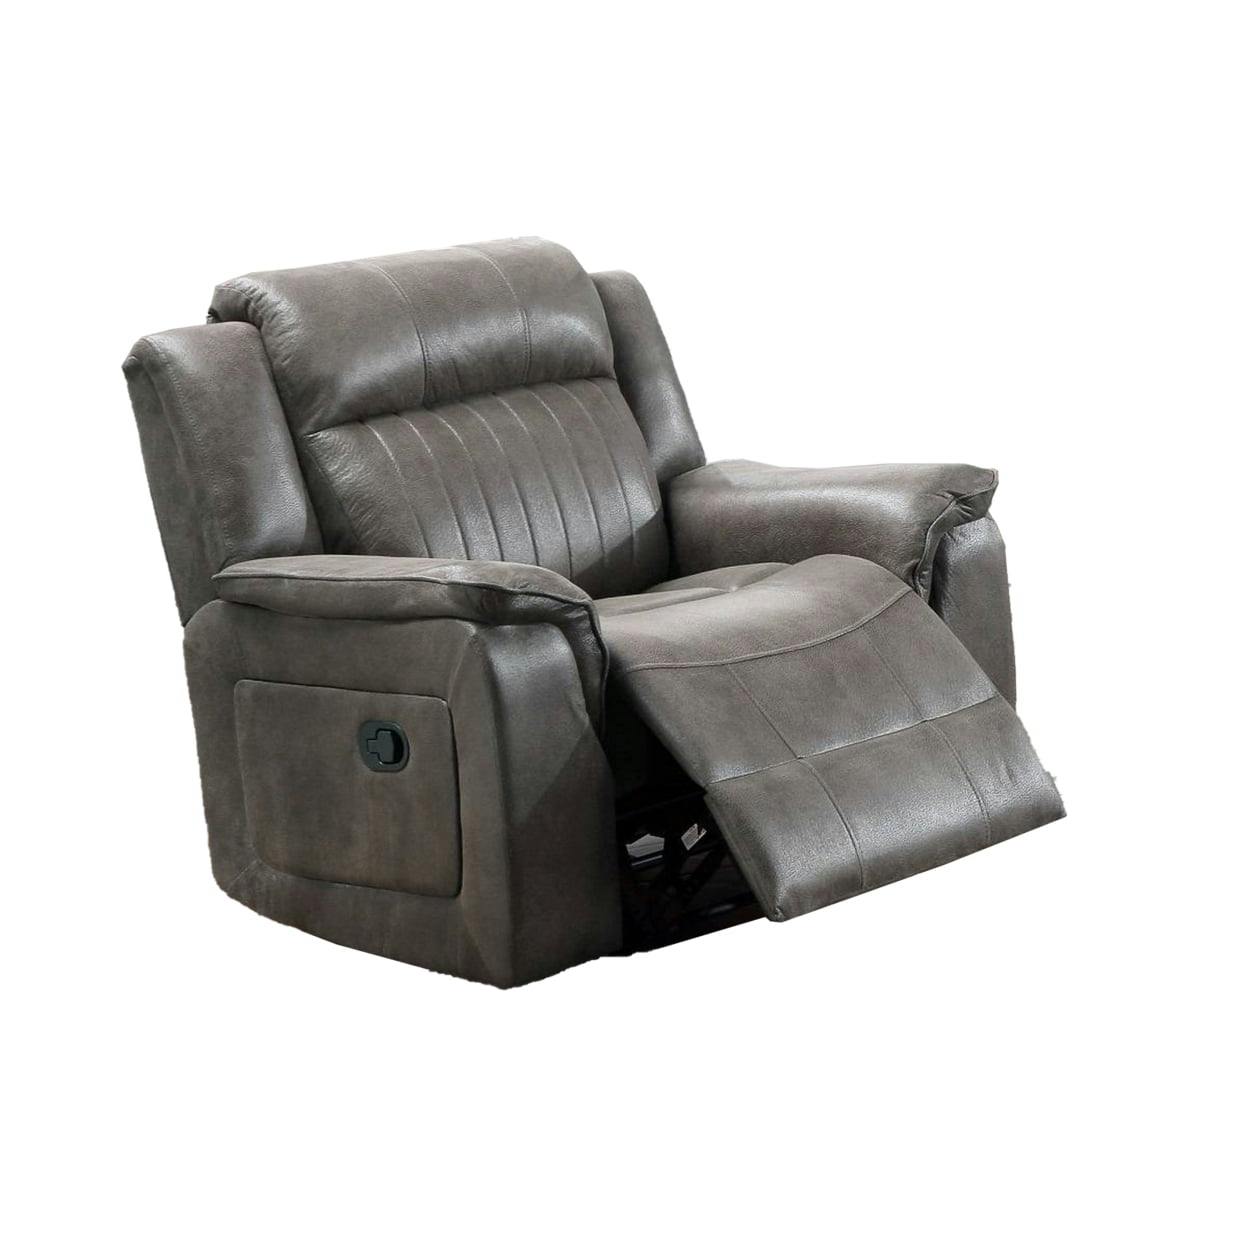 Luxurious Gray Fabric Manual Recliner Chair with Pillow Top Arms